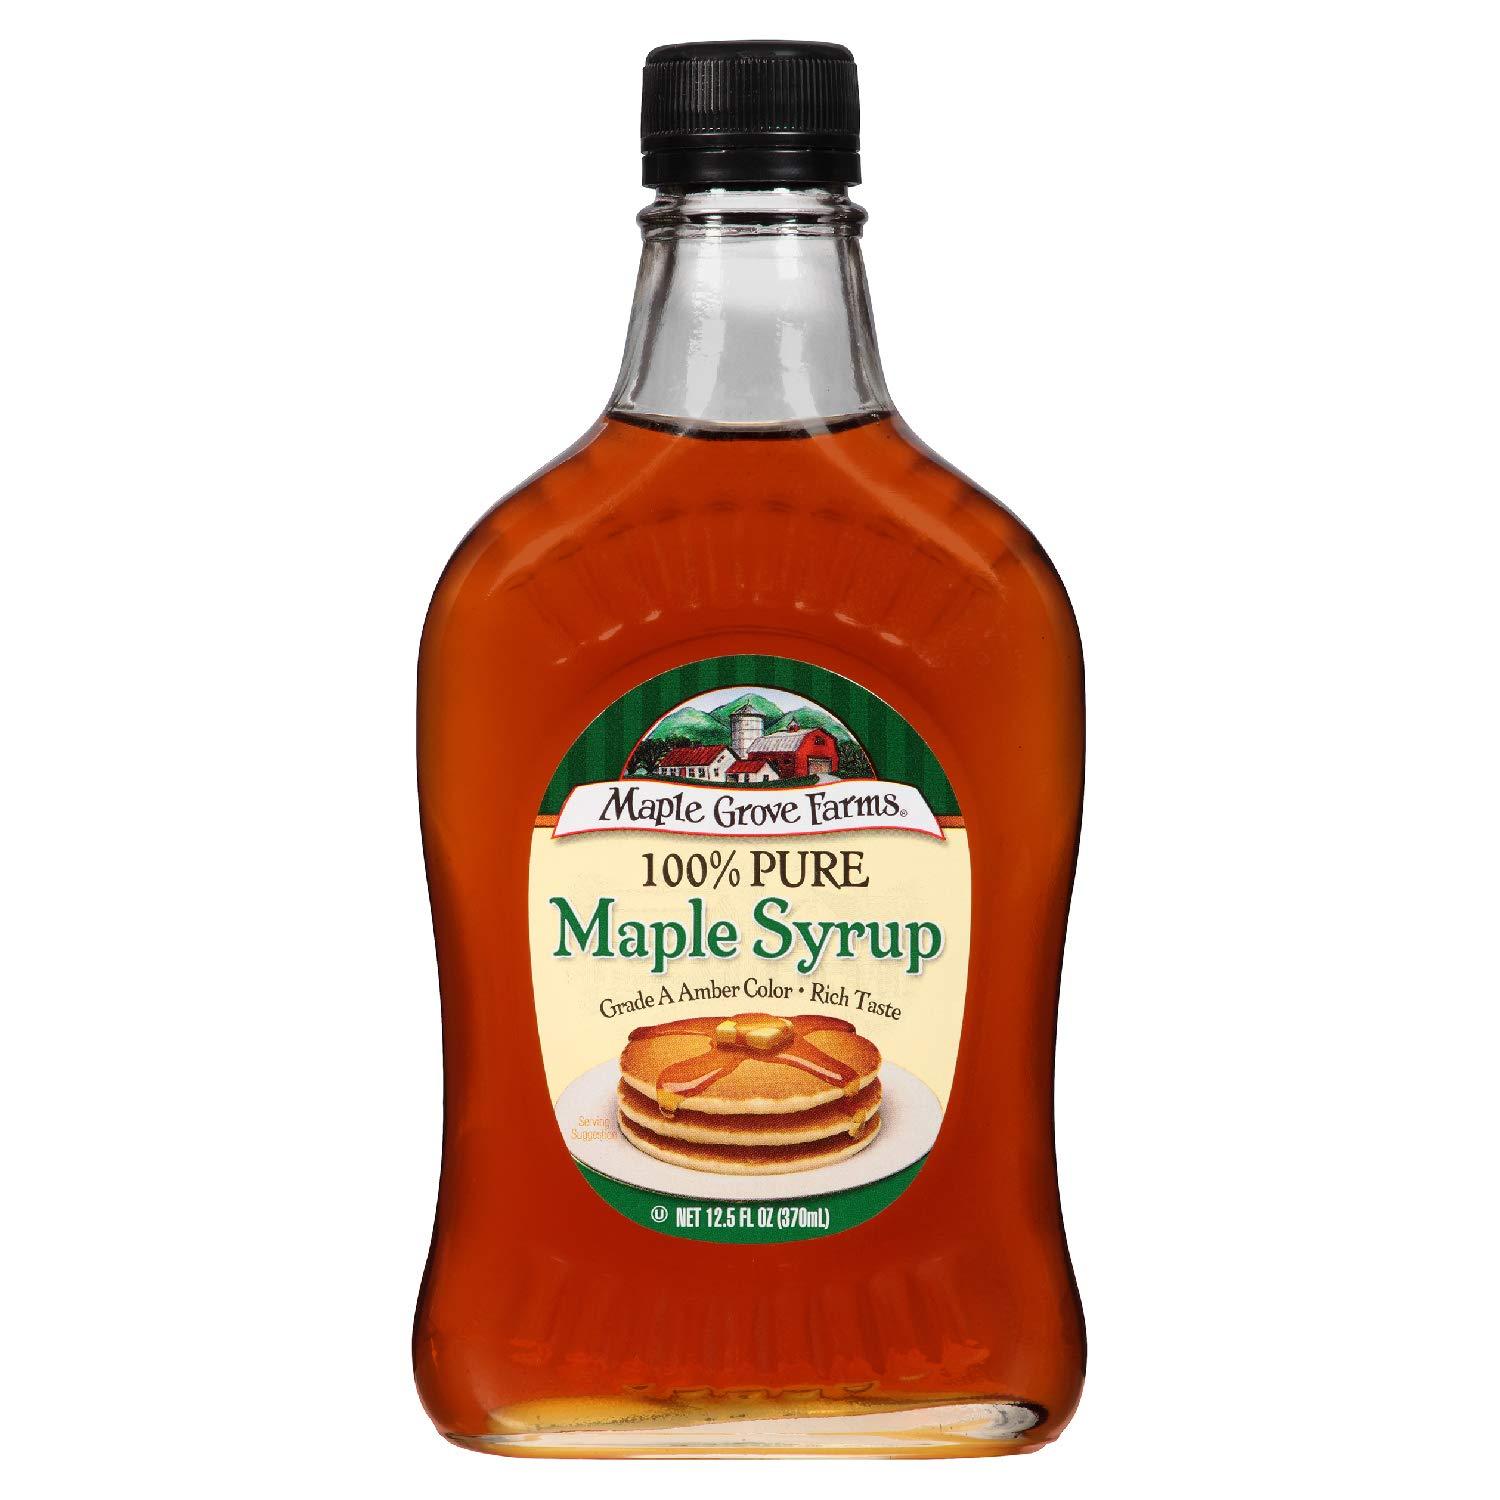 Maple Grove Farms Pure Maple Syrup for $6.63 Shipped